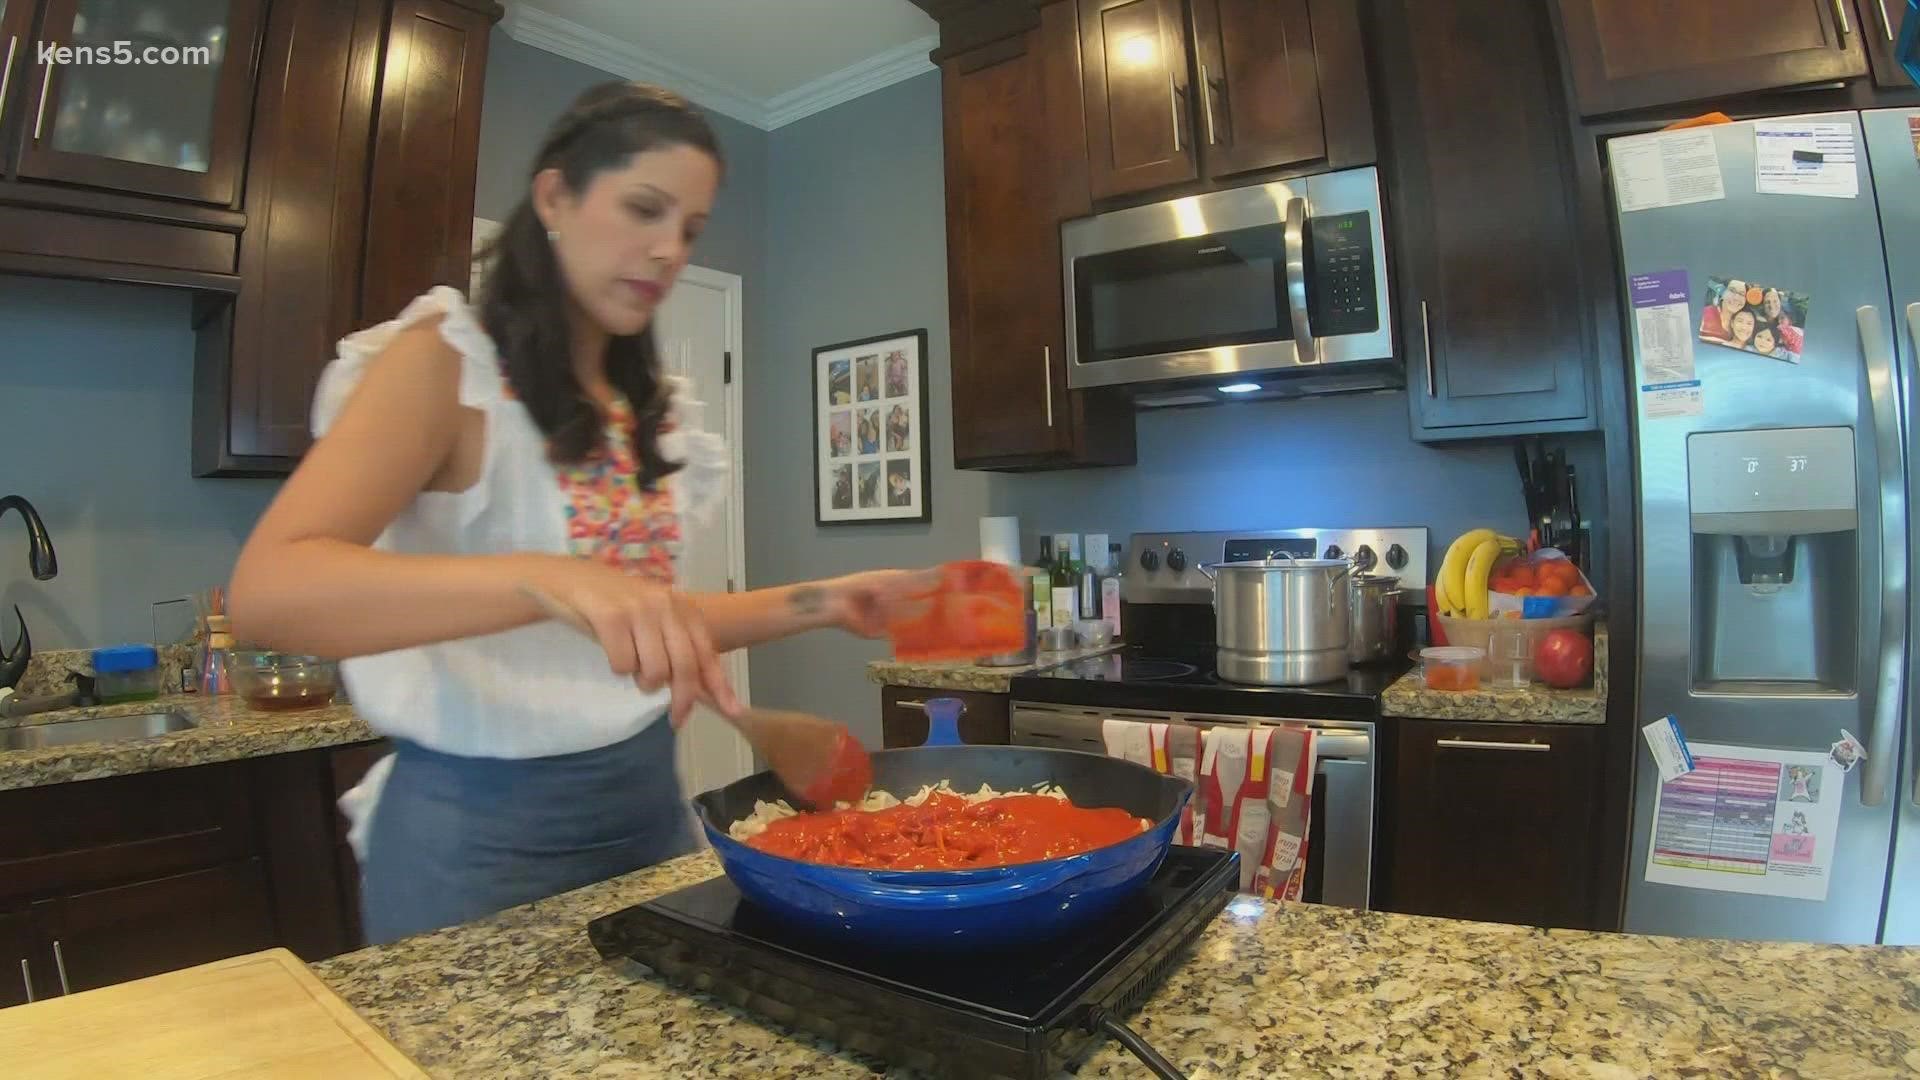 Dora Stone changed up her cooking style after experiencing health issues. Her story is one younger people can relate to. She's got 170k followers, mostly on TikTok.